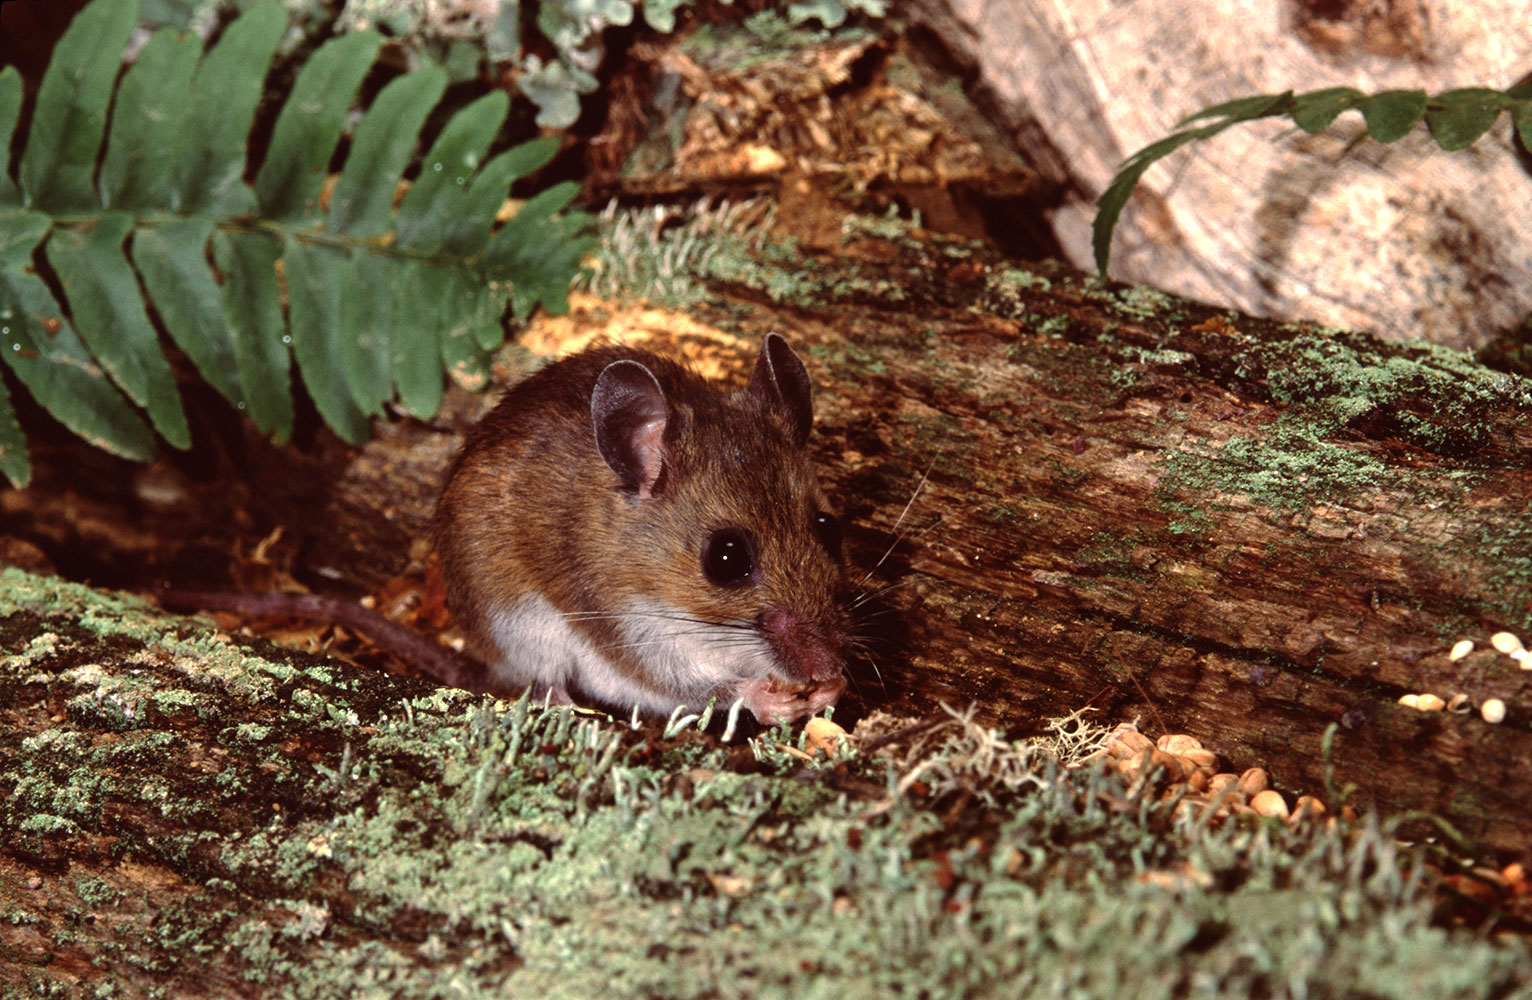 A white-footed mouse huddles under a fern frond on a mossy log